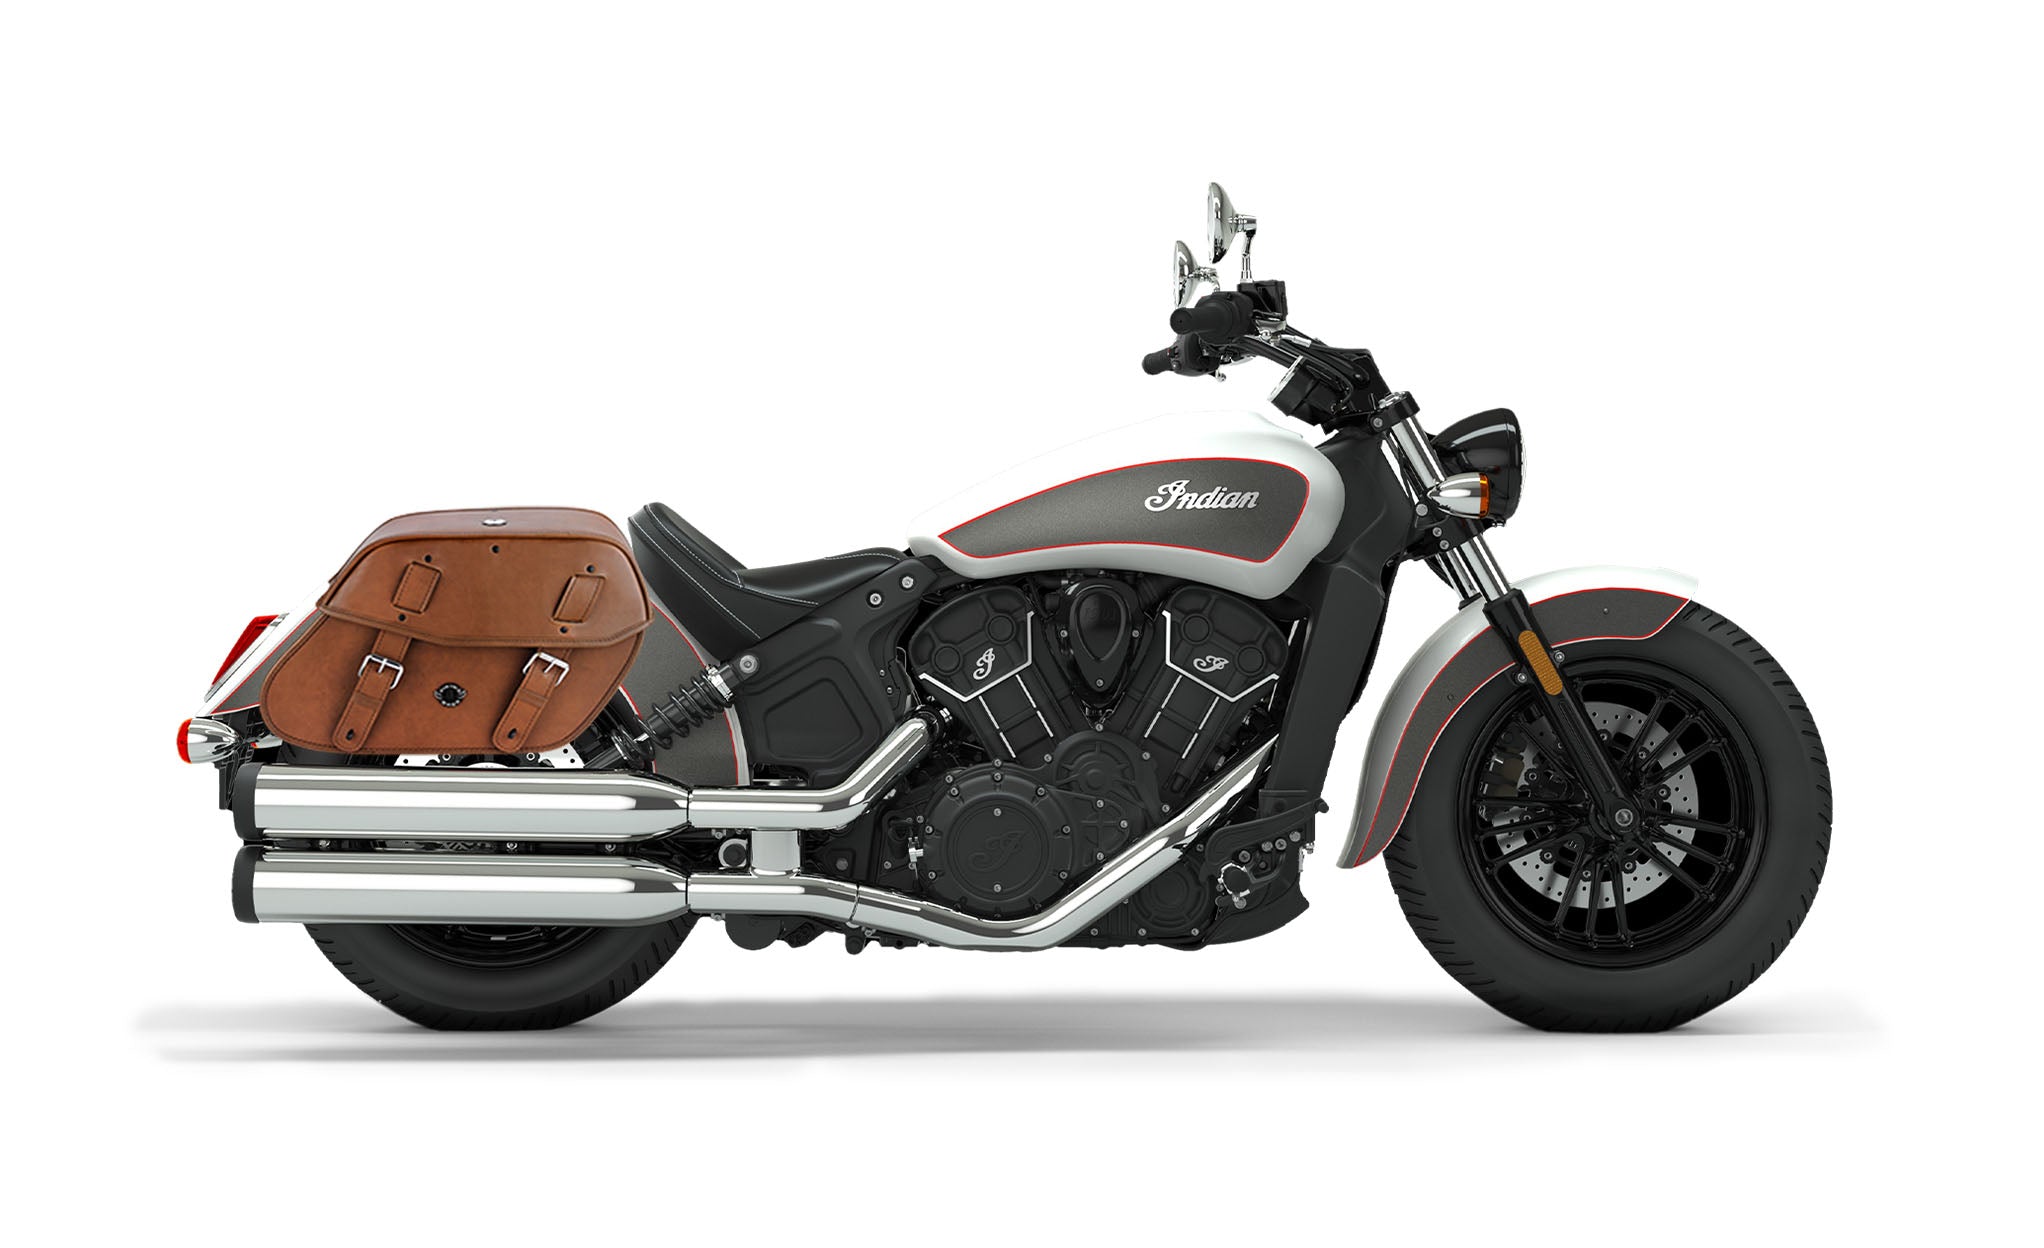 Viking Odin Brown Large Indian Scout Sixty Leather Motorcycle Saddlebags on Bike Photo @expand